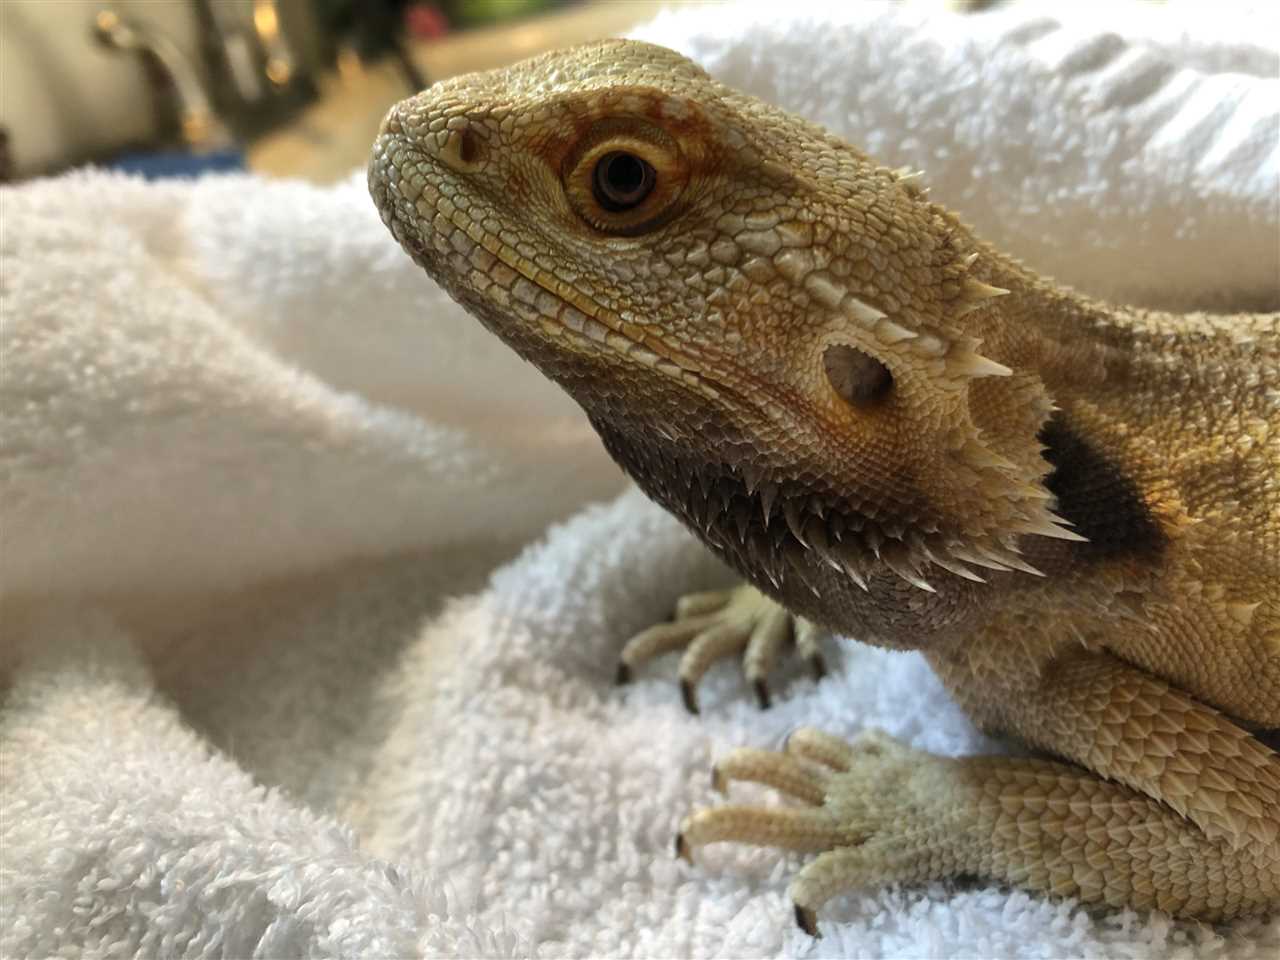 Recognizing Stress and Anxiety in Bearded Dragons